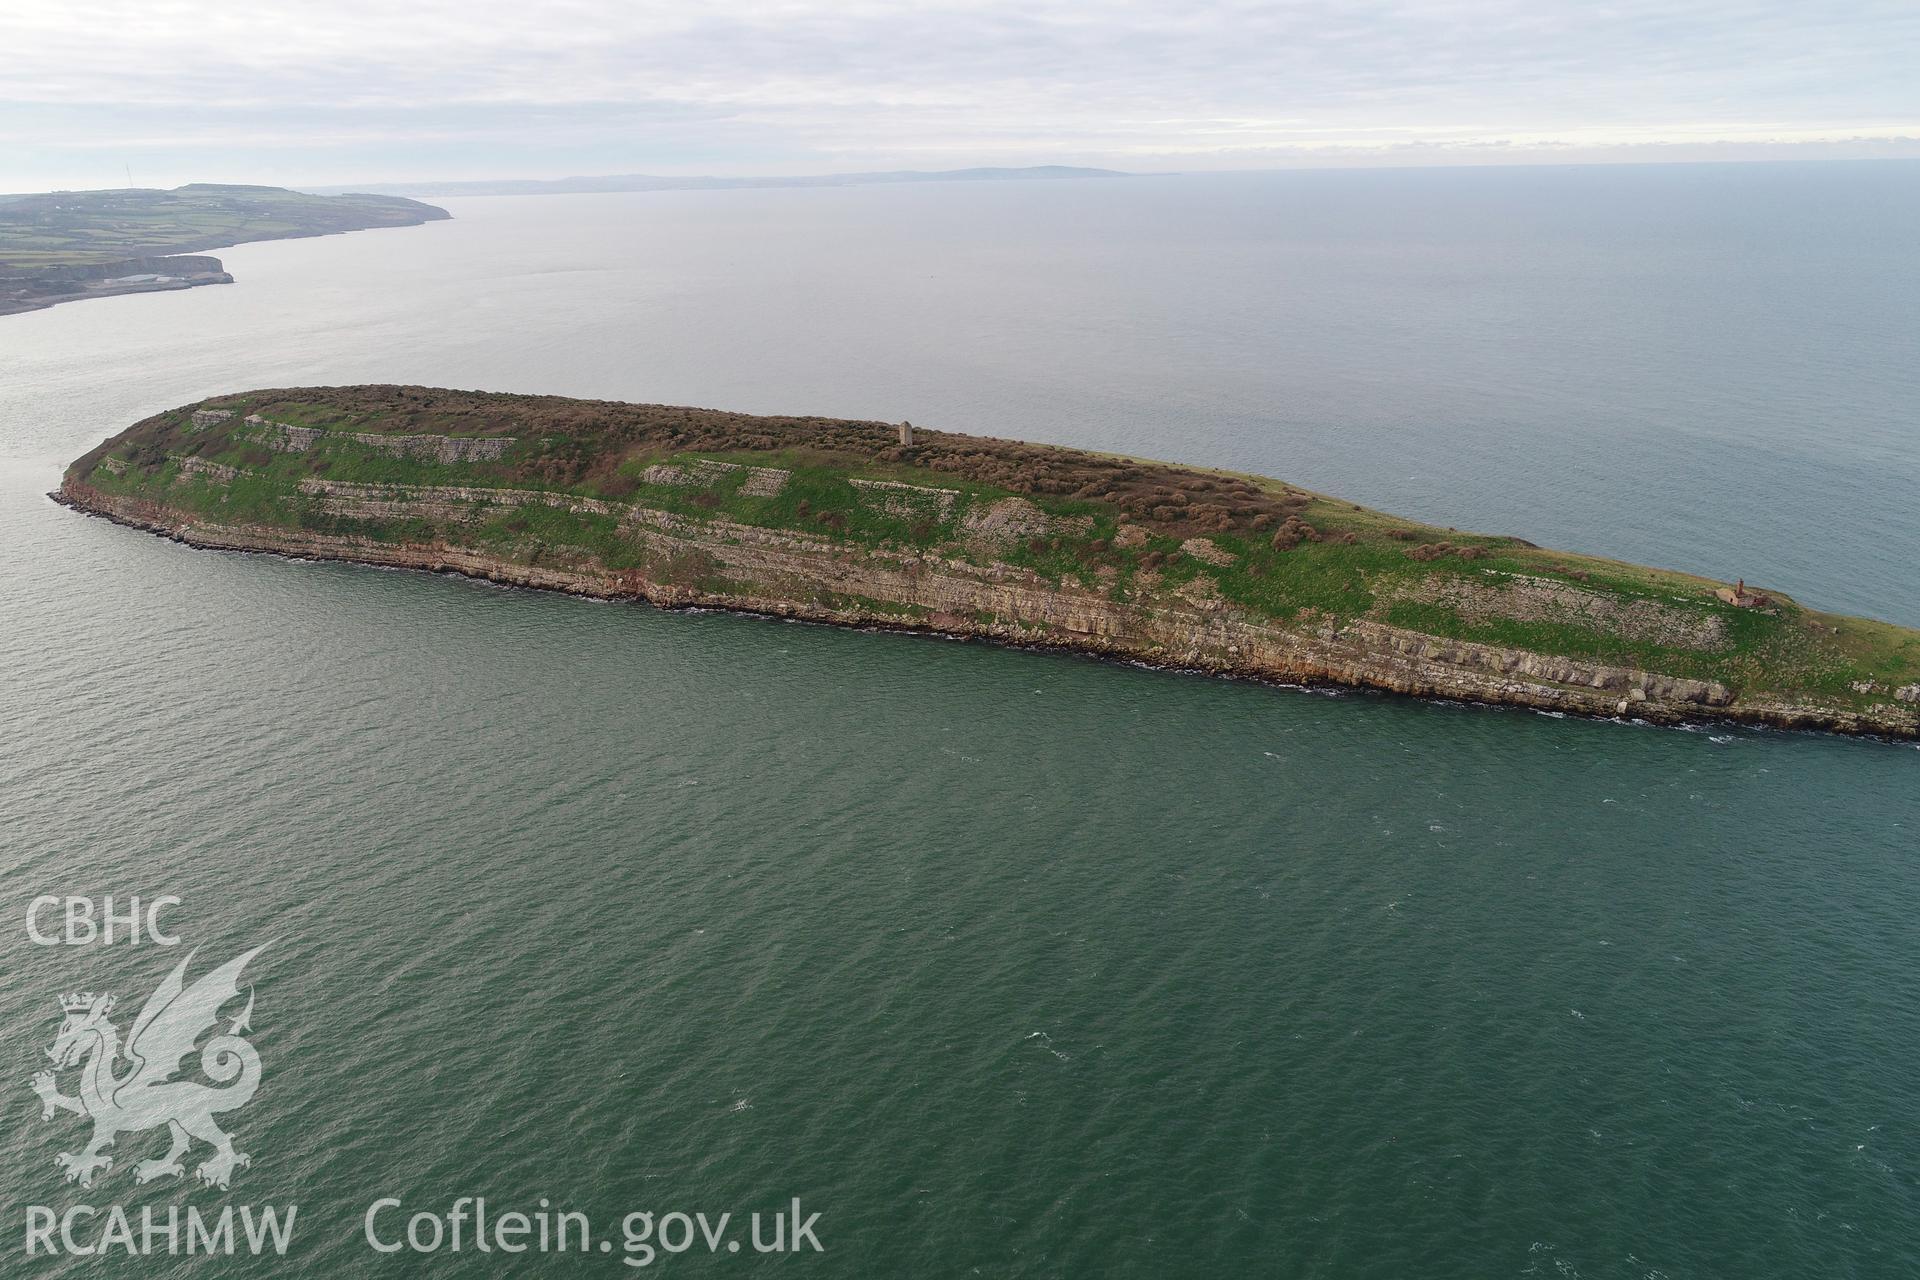 Drone/UAV aerial view of Puffin Island or Ynys Seiriol taken from the south-east on  winter's afternoon on 26th November 2018 for the CHERISH Project. ? Crown: CHERISH PROJECT 2018. Produced with EU funds through the Ireland Wales Co-operation Programme 2014-2020. All material made freely available through the Open Government Licence.